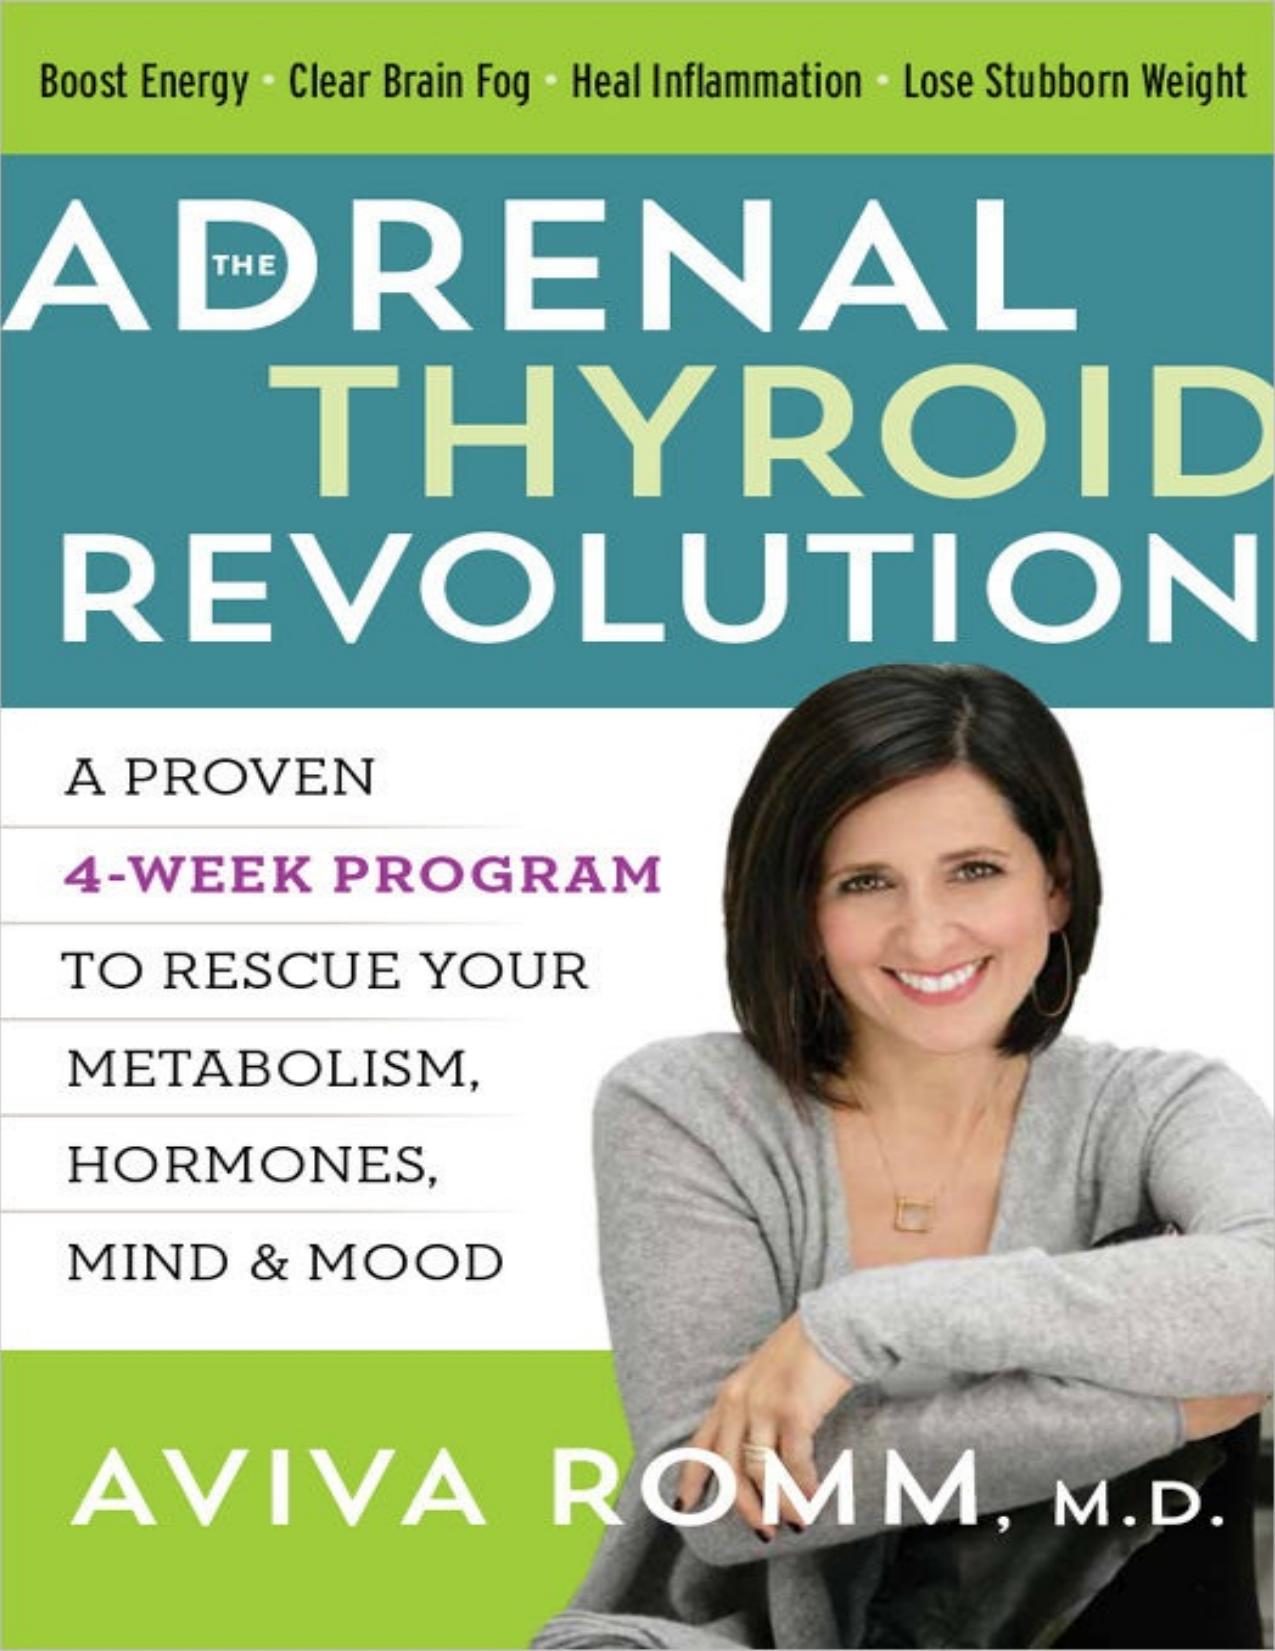 The Adrenal Thyroid Revolution: A Proven 4-Week Program to Rescue Your Metabolism, Hormones, Mind \& Mood - PDFDrive.com